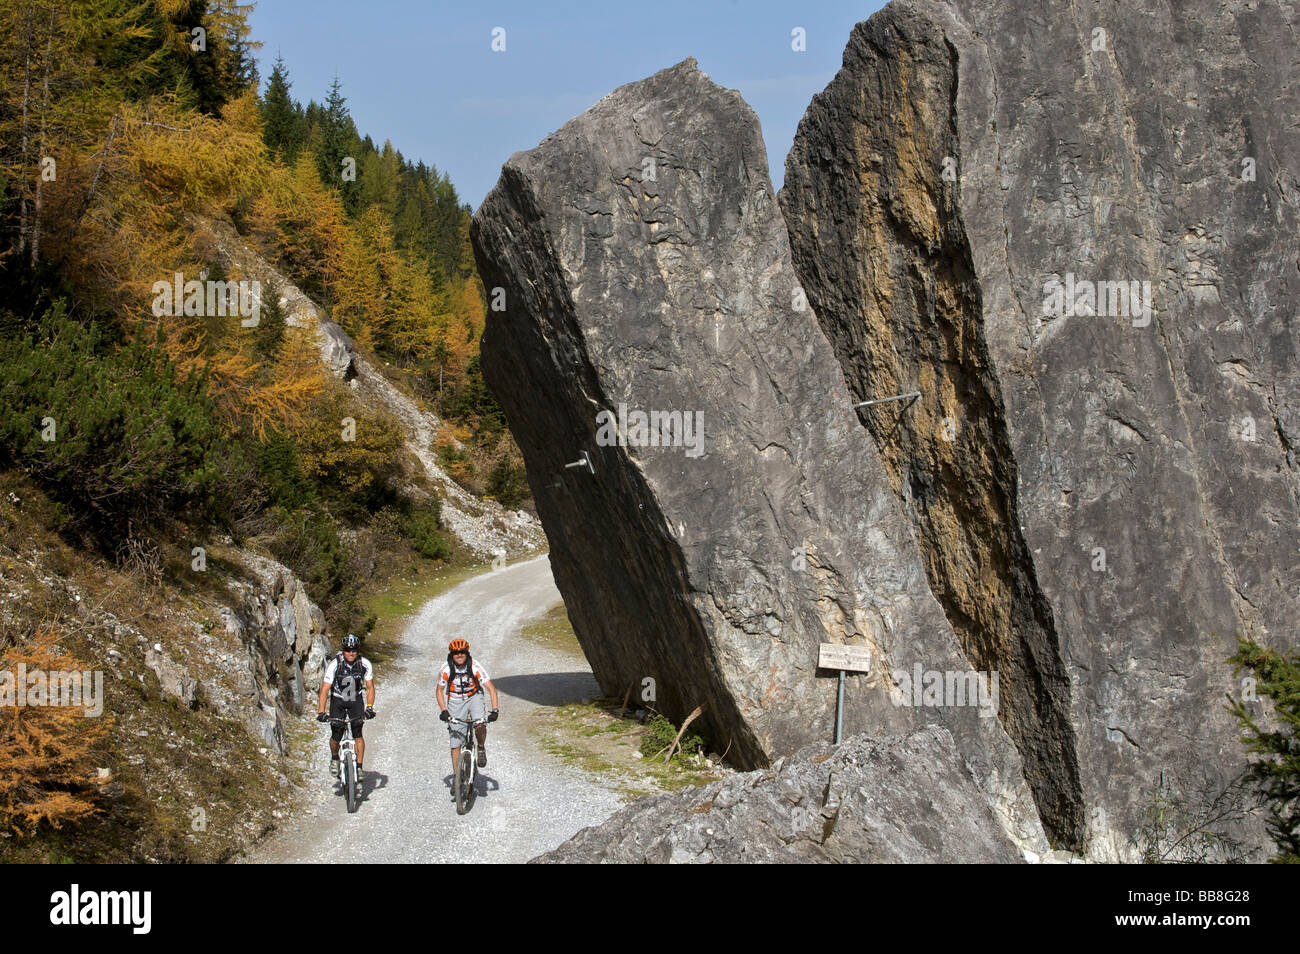 Mountainbikers at the Pinnisalm pasture in the Pinnistal valley, Tyrol, Austria Stock Photo